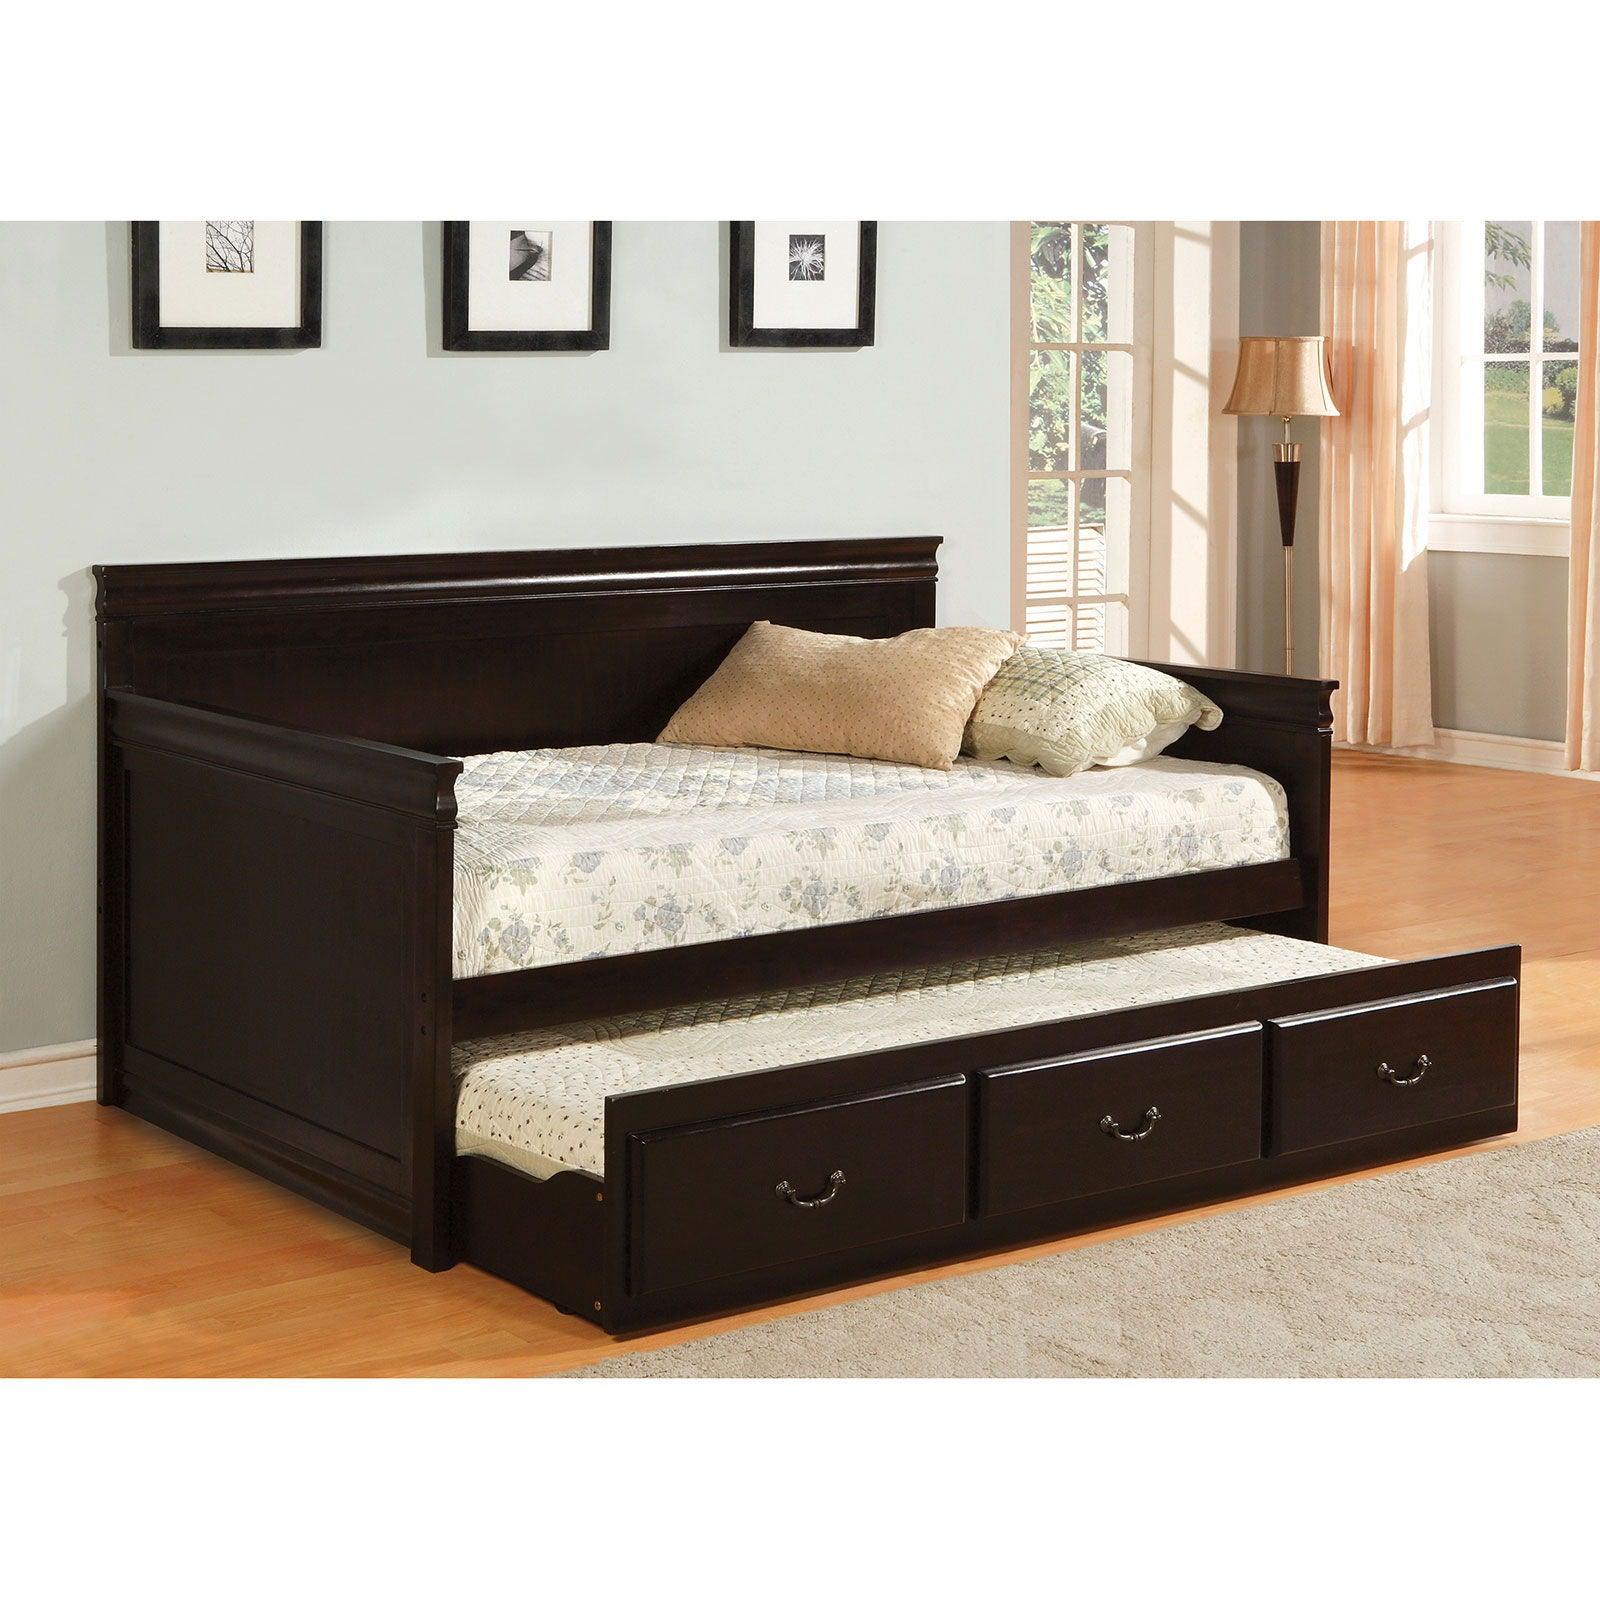 Furniture of America - Sahara - Daybed With Twin Trundle - Espresso - 5th Avenue Furniture